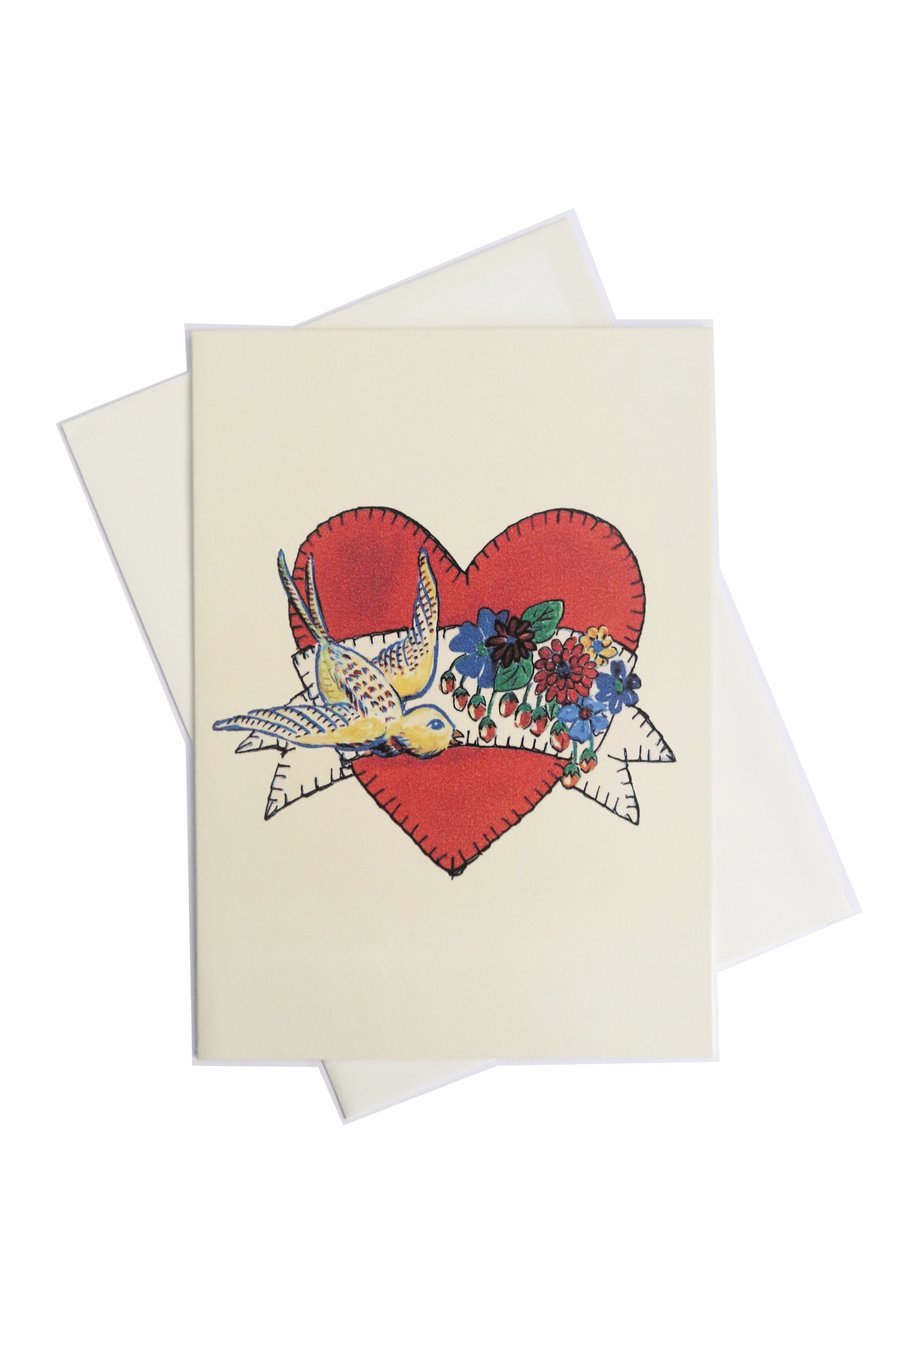 Greeting card for your loved one  - artwork by Betty Shek